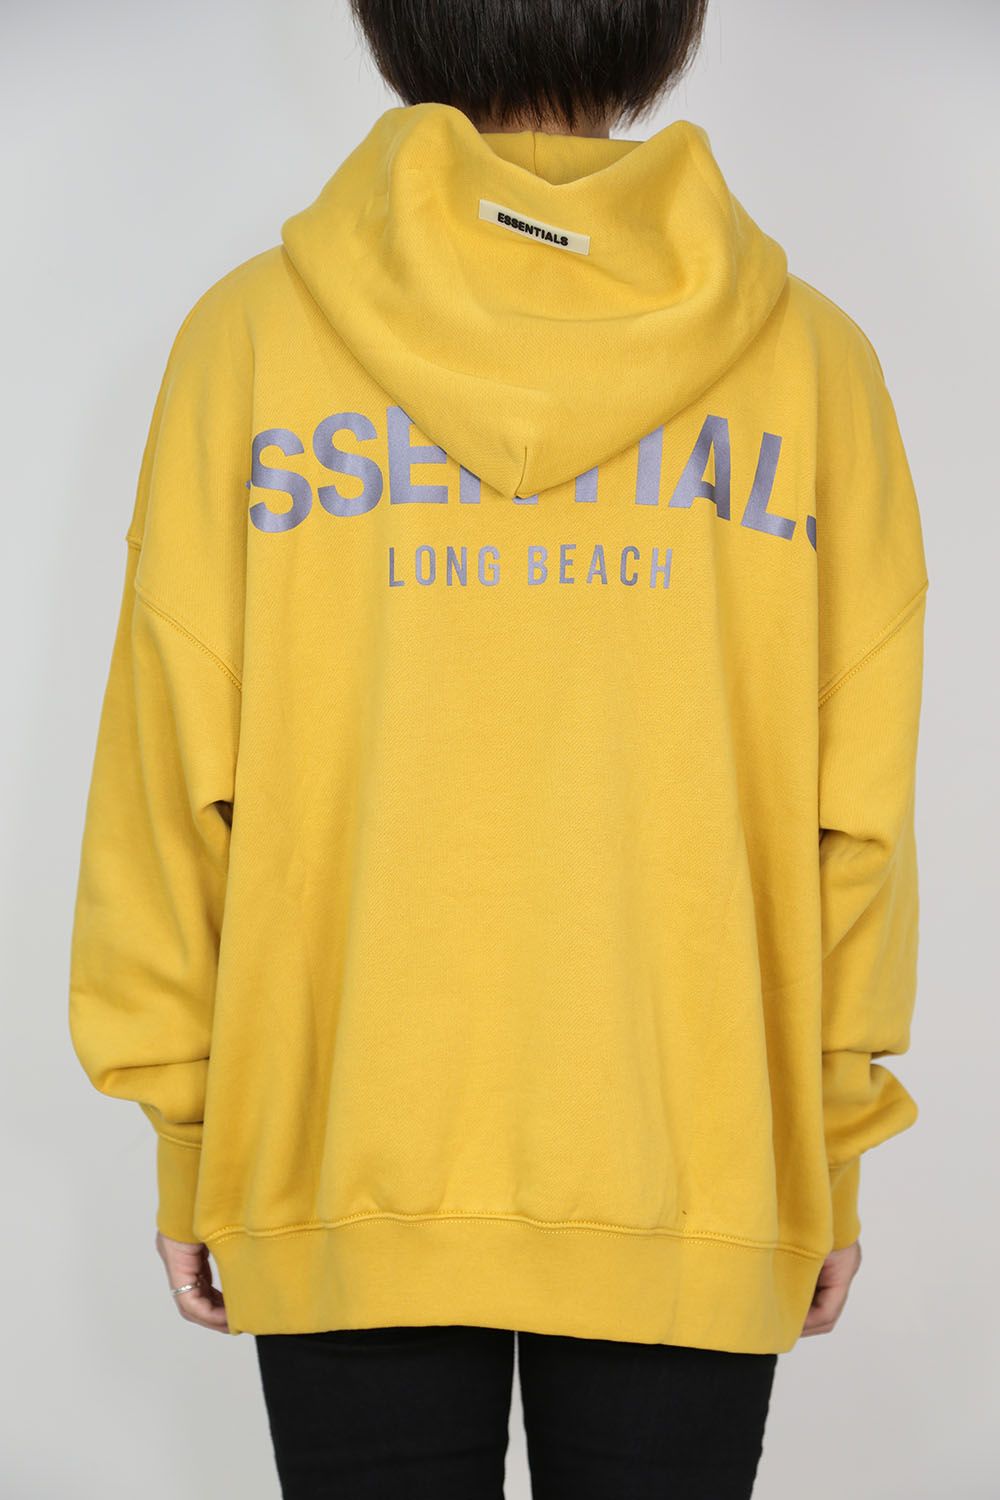 【LB限定】PULLOVER HOODIE REFLECTOR / イエロー - S